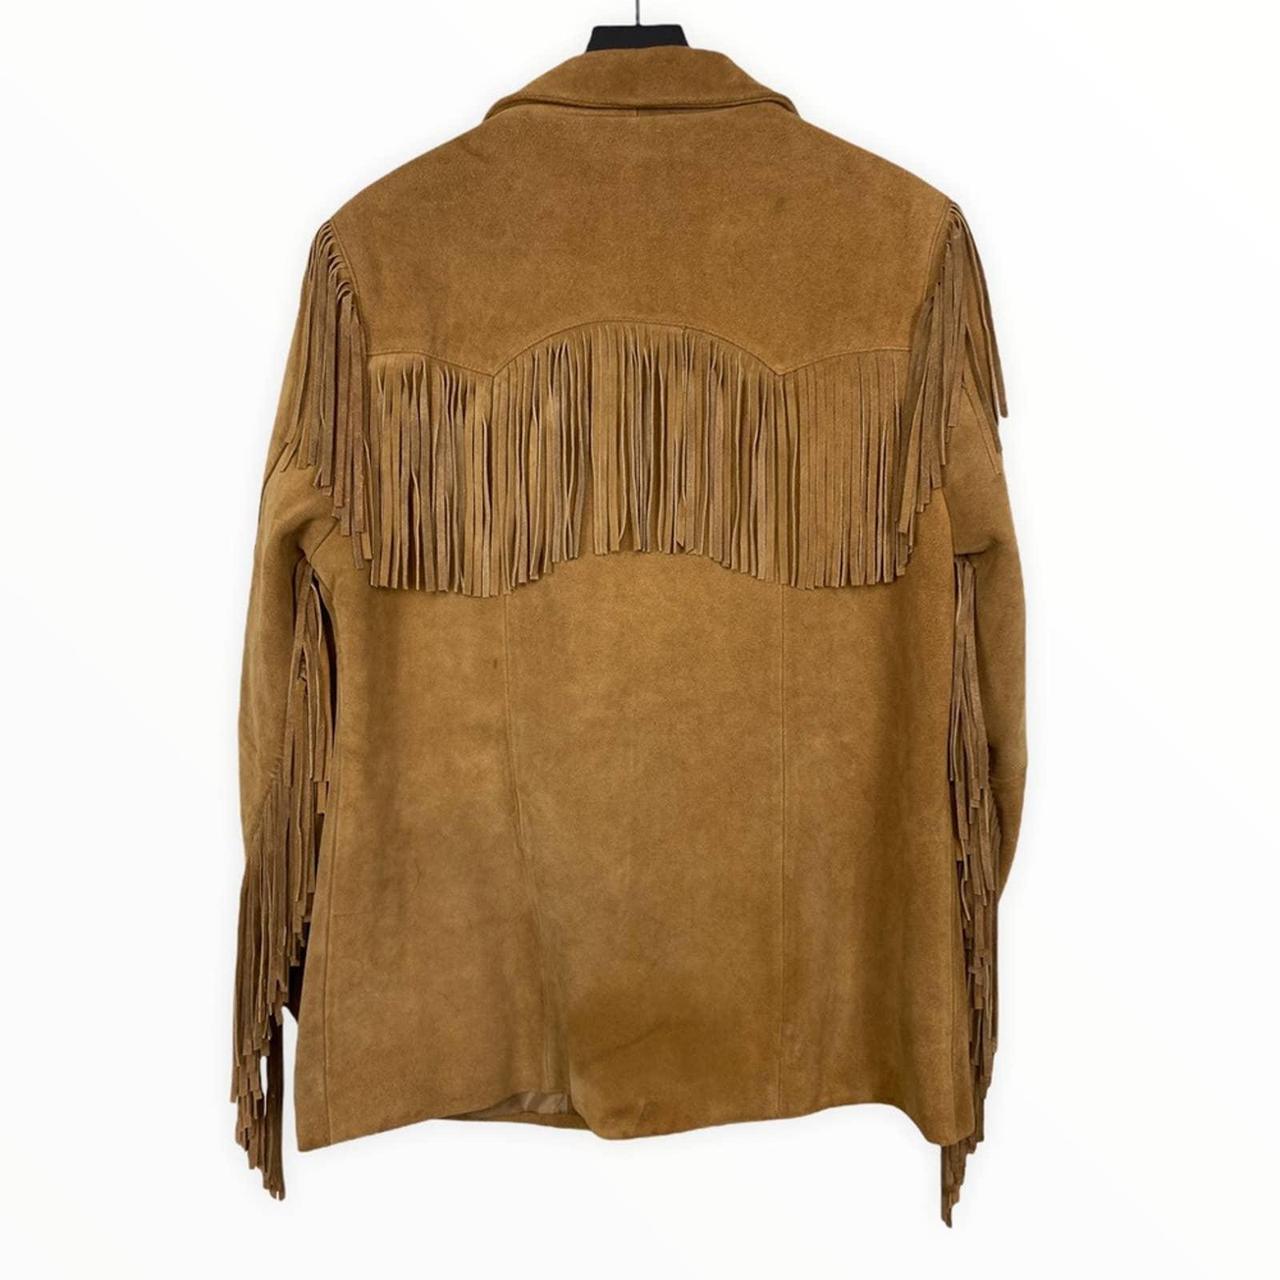 Product Image 3 - Western Style Jacket in a